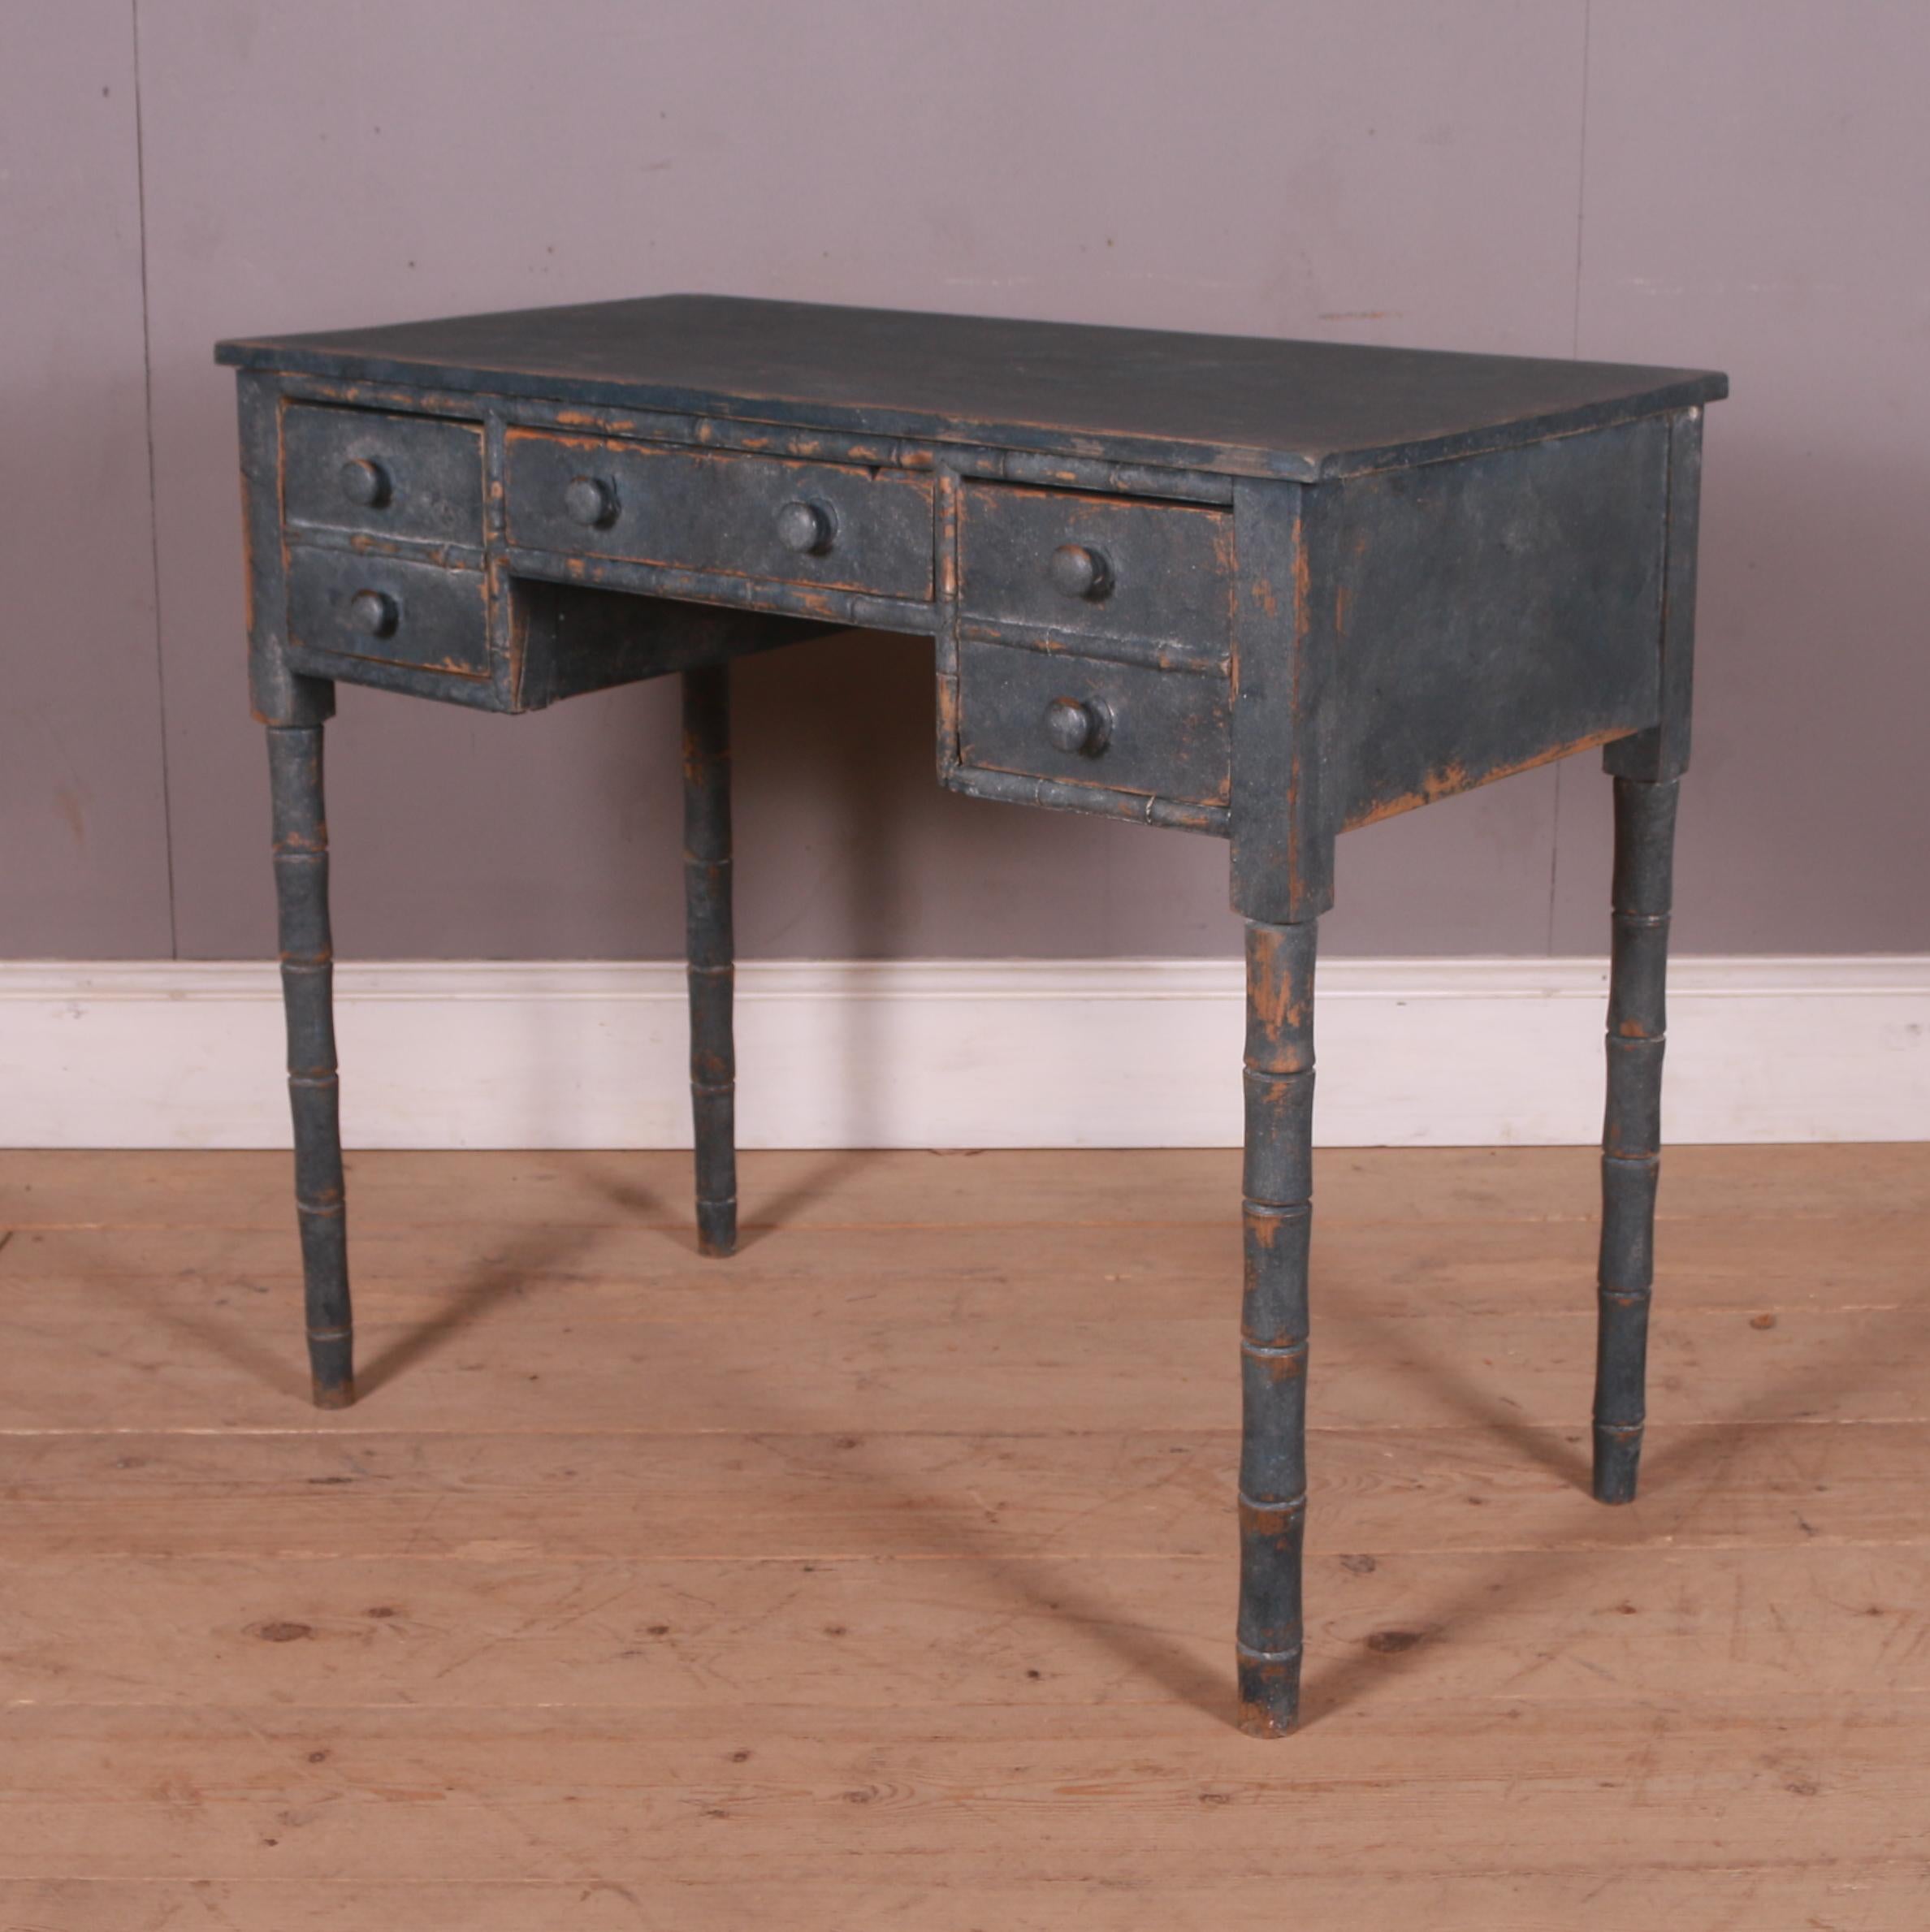 Small early 19th C English faux bamboo pine desk / side table. 1830.

Centre clearance is 14